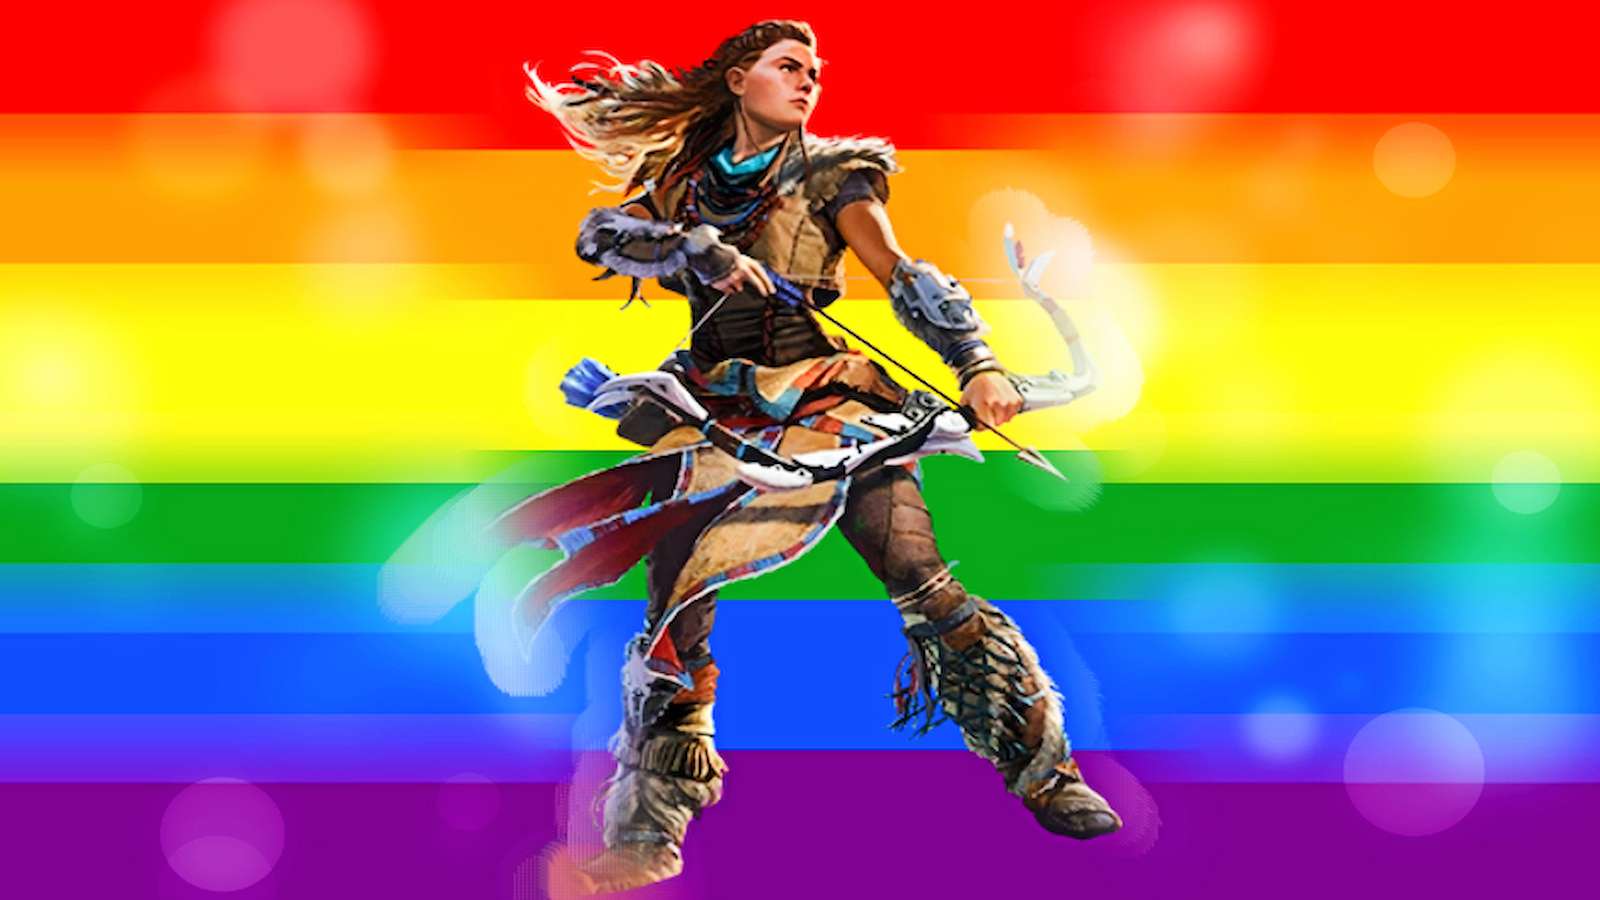 Aloy standing in front of the pride flag